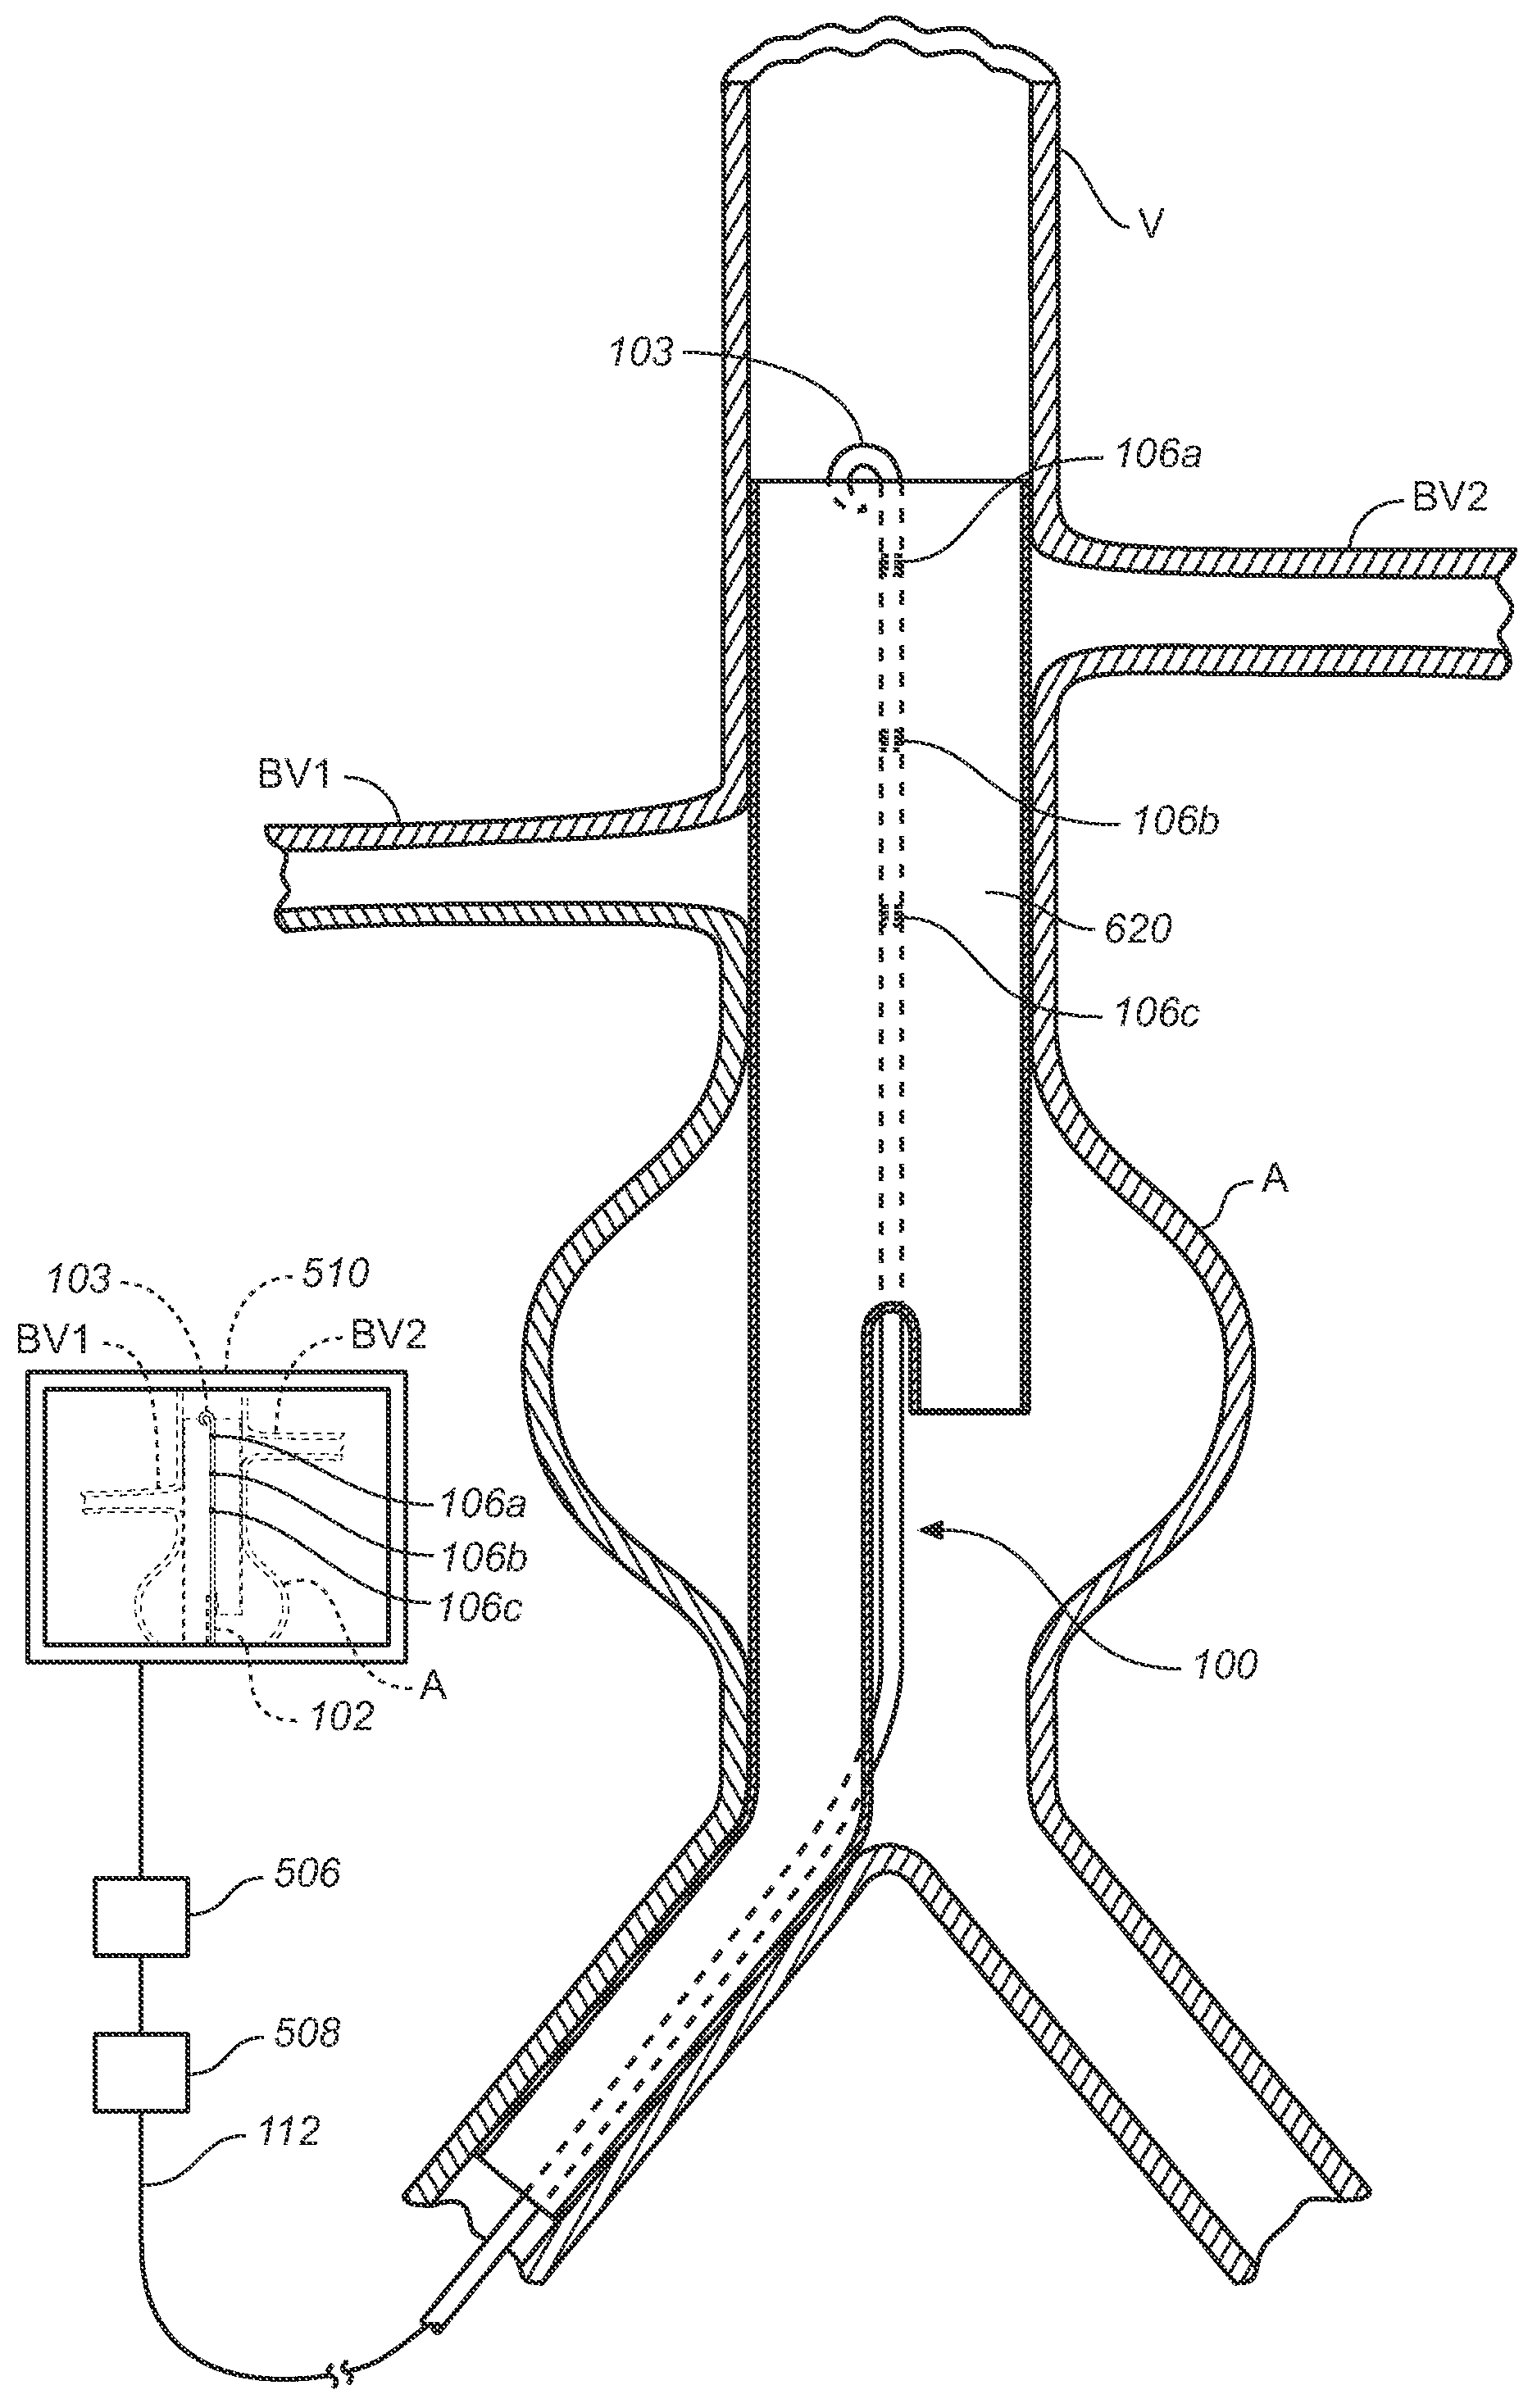 Vessel Position and Configuration Imaging Apparatus and Methods